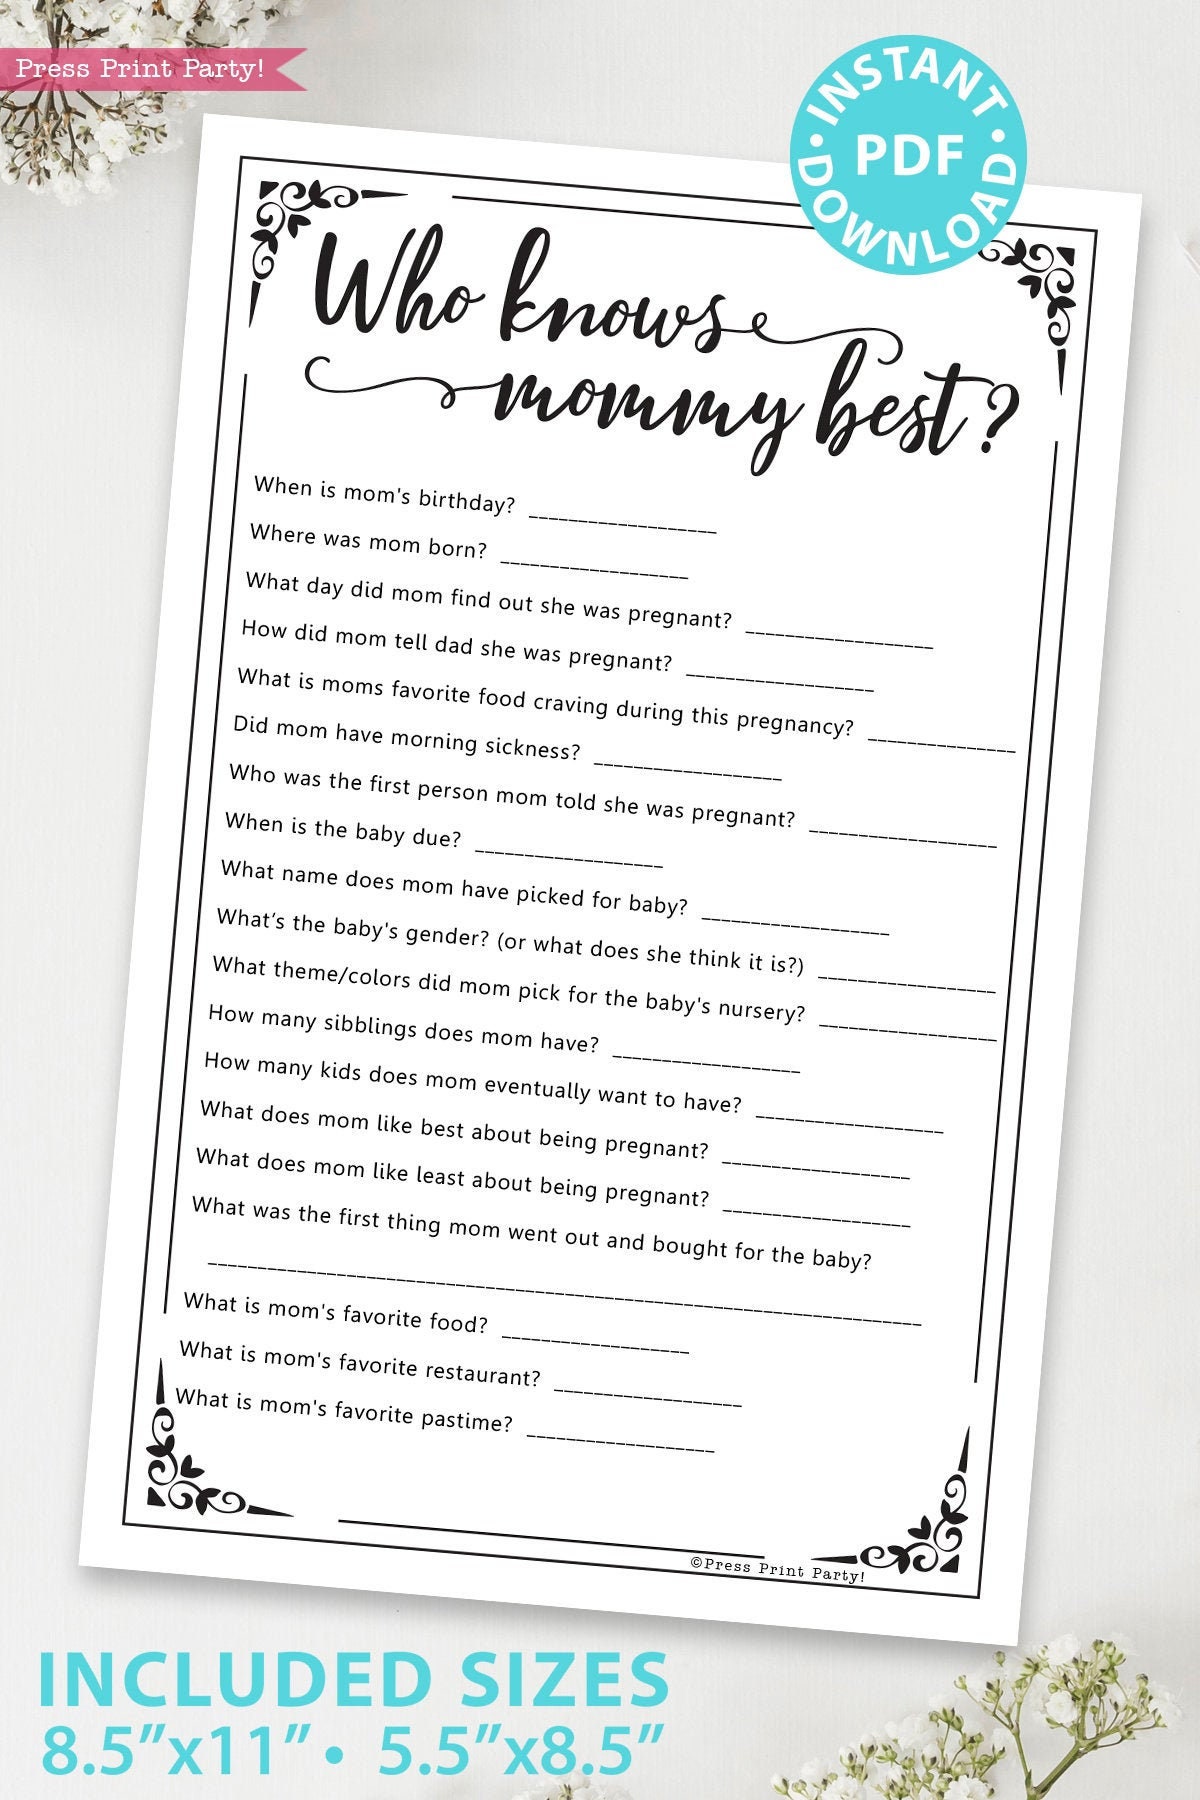 who-knows-mommy-best-baby-shower-game-printable-in-rustic-etsy-canada